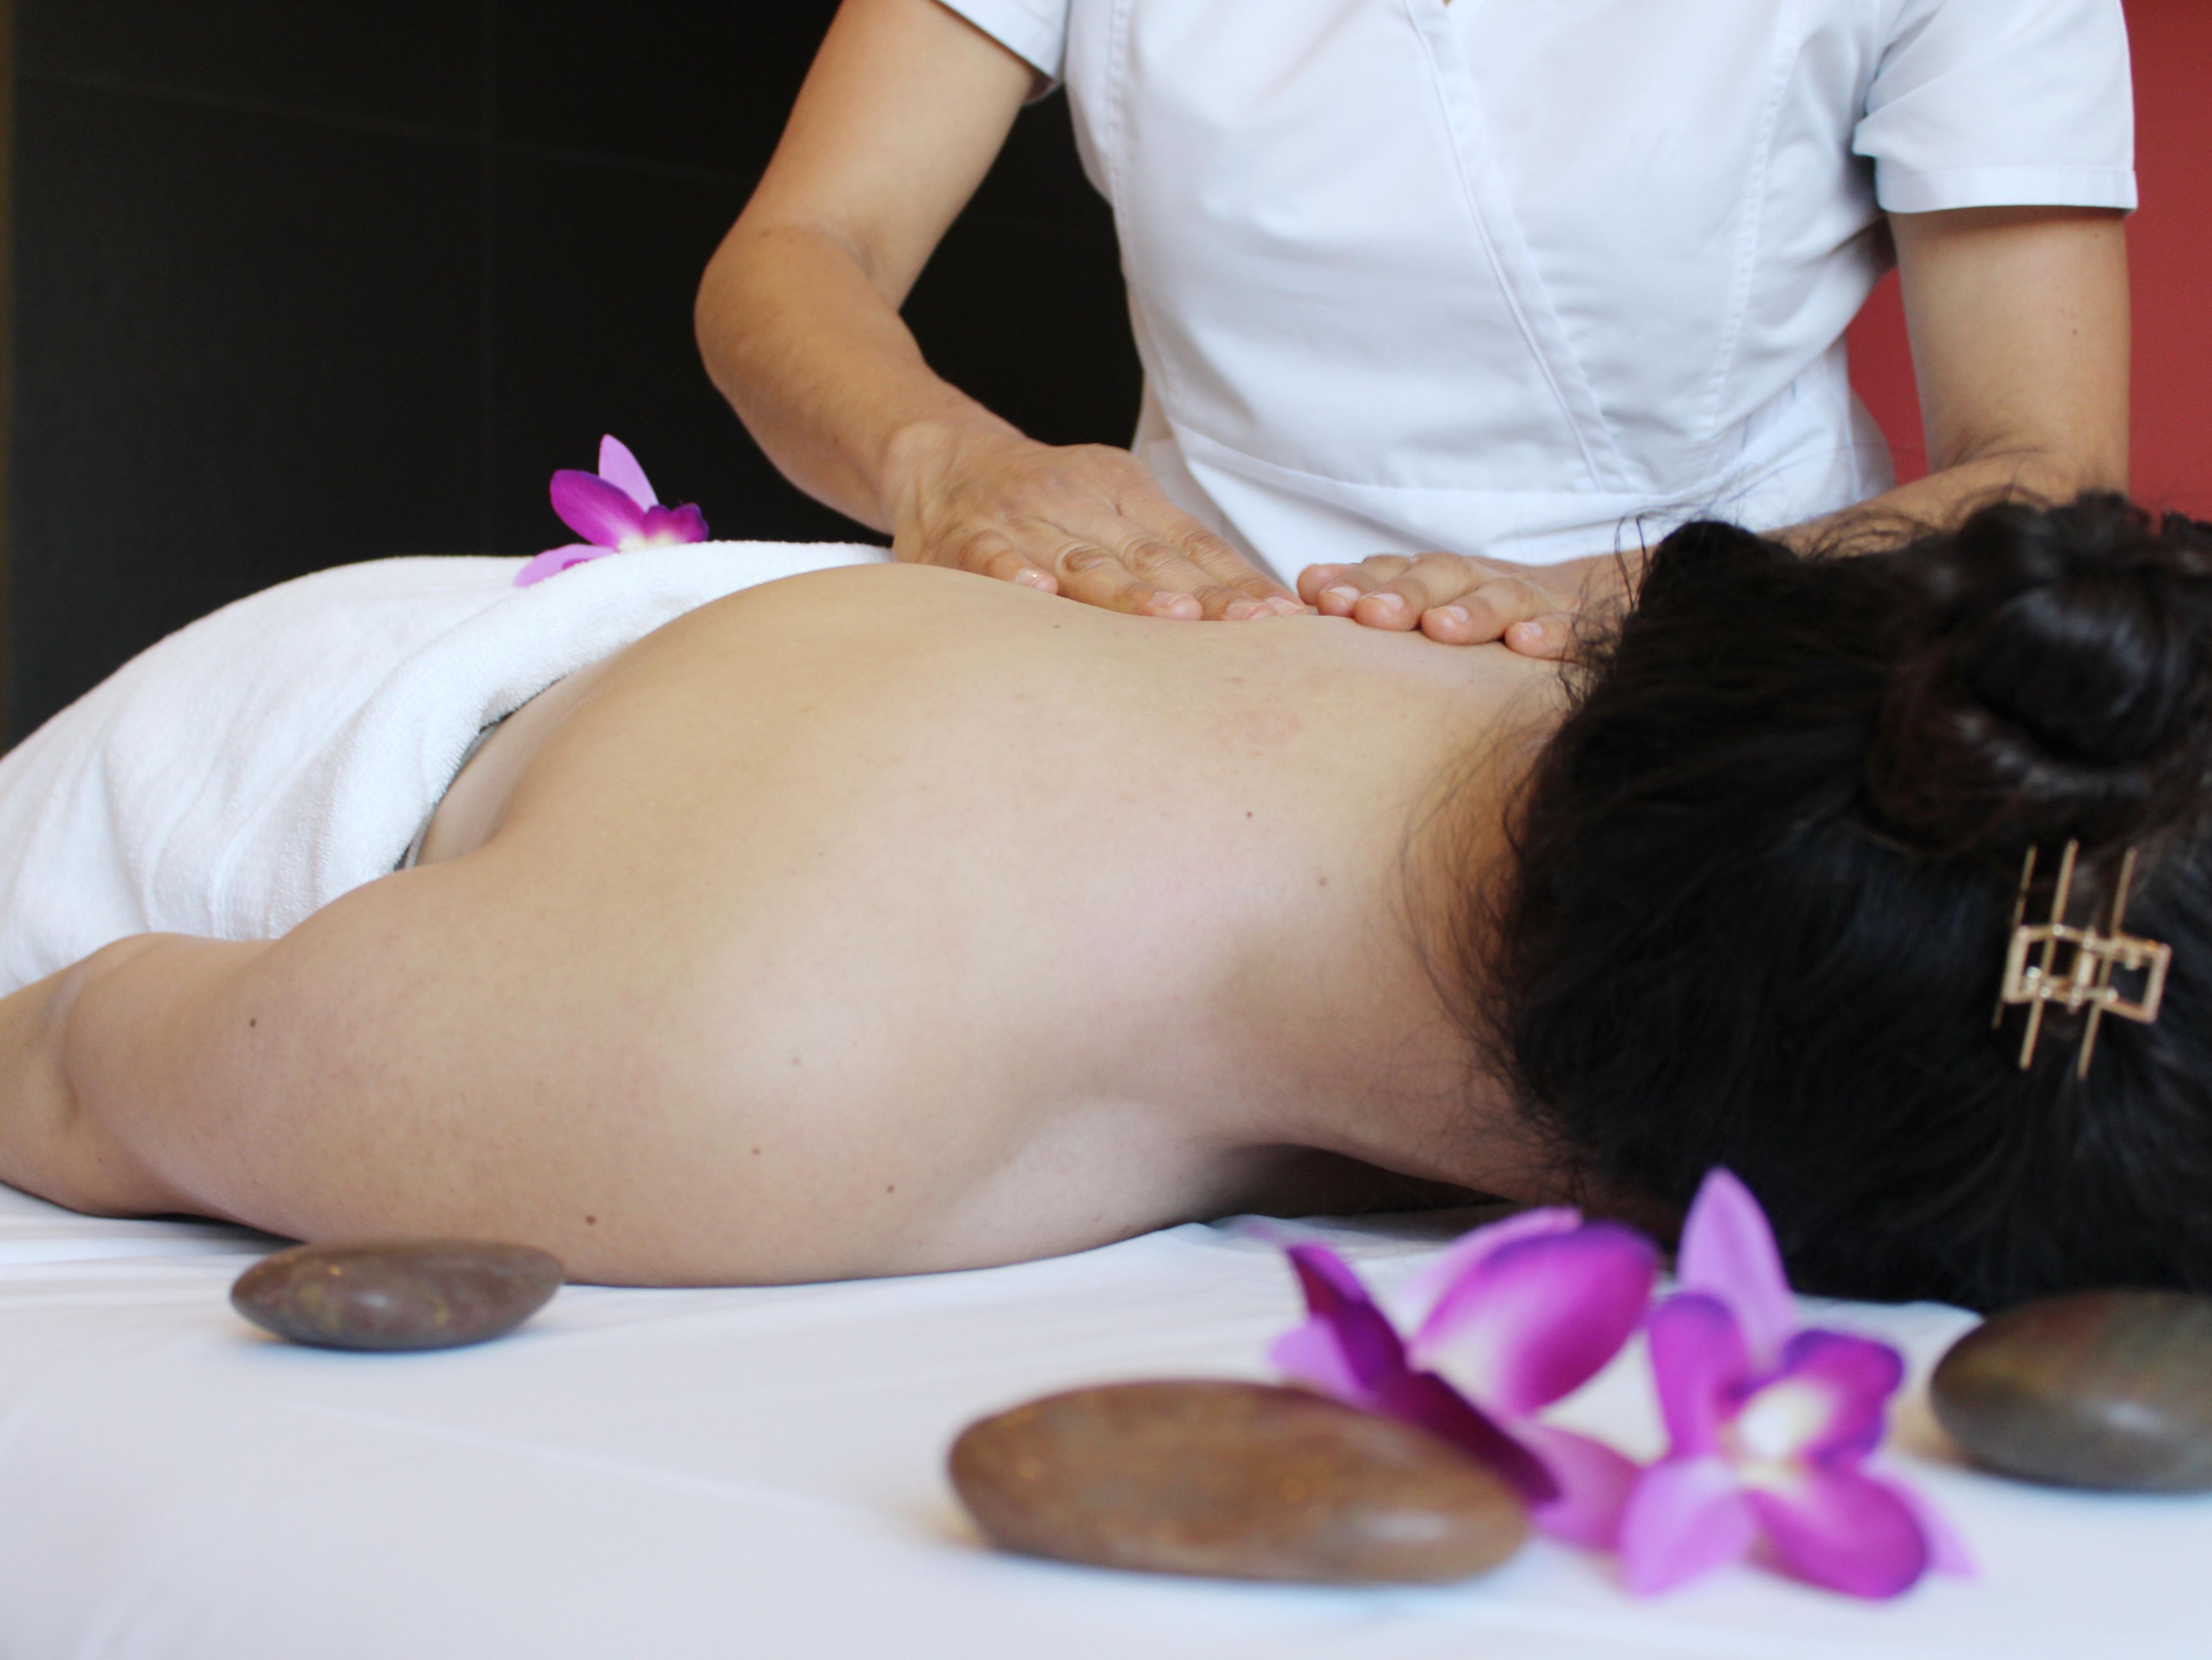 Do you need a relax,  stay with us  and enjoy our spa services